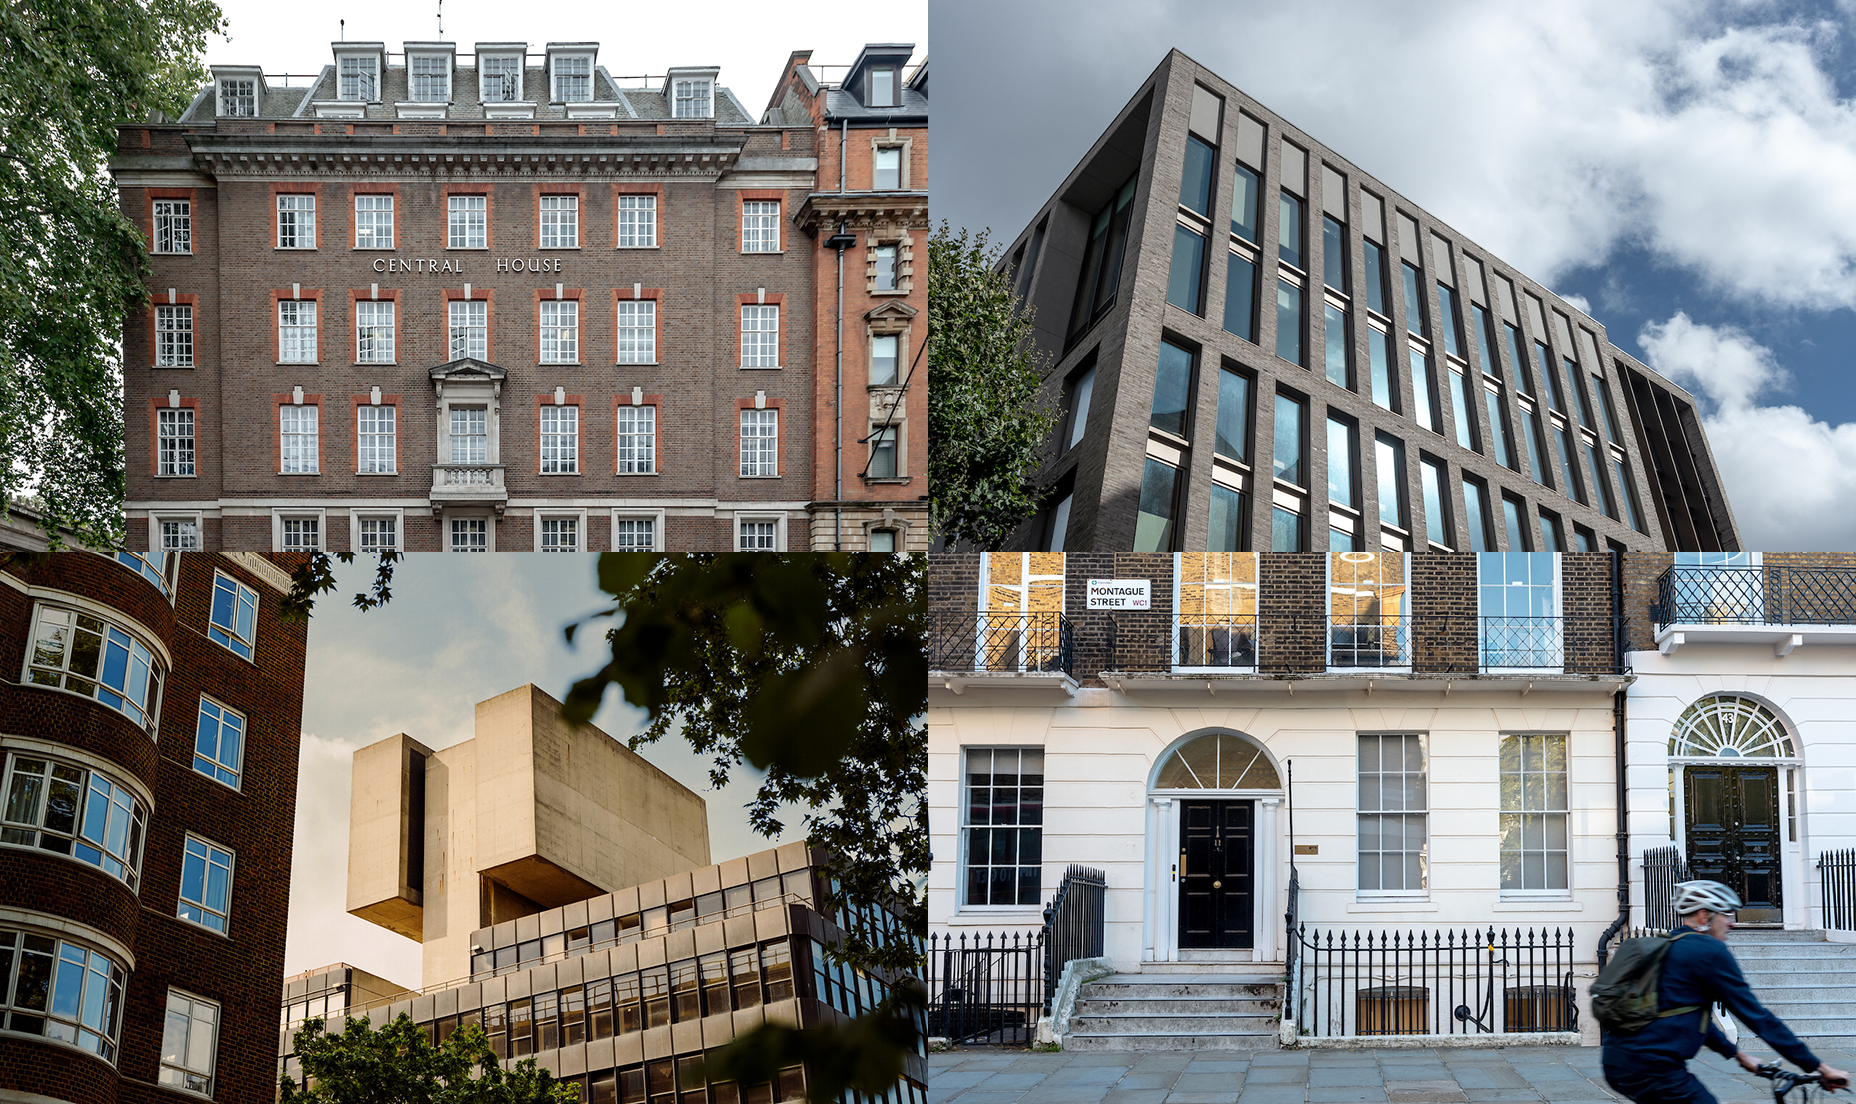 Composite image of Bartlett Bloomsbury campuses